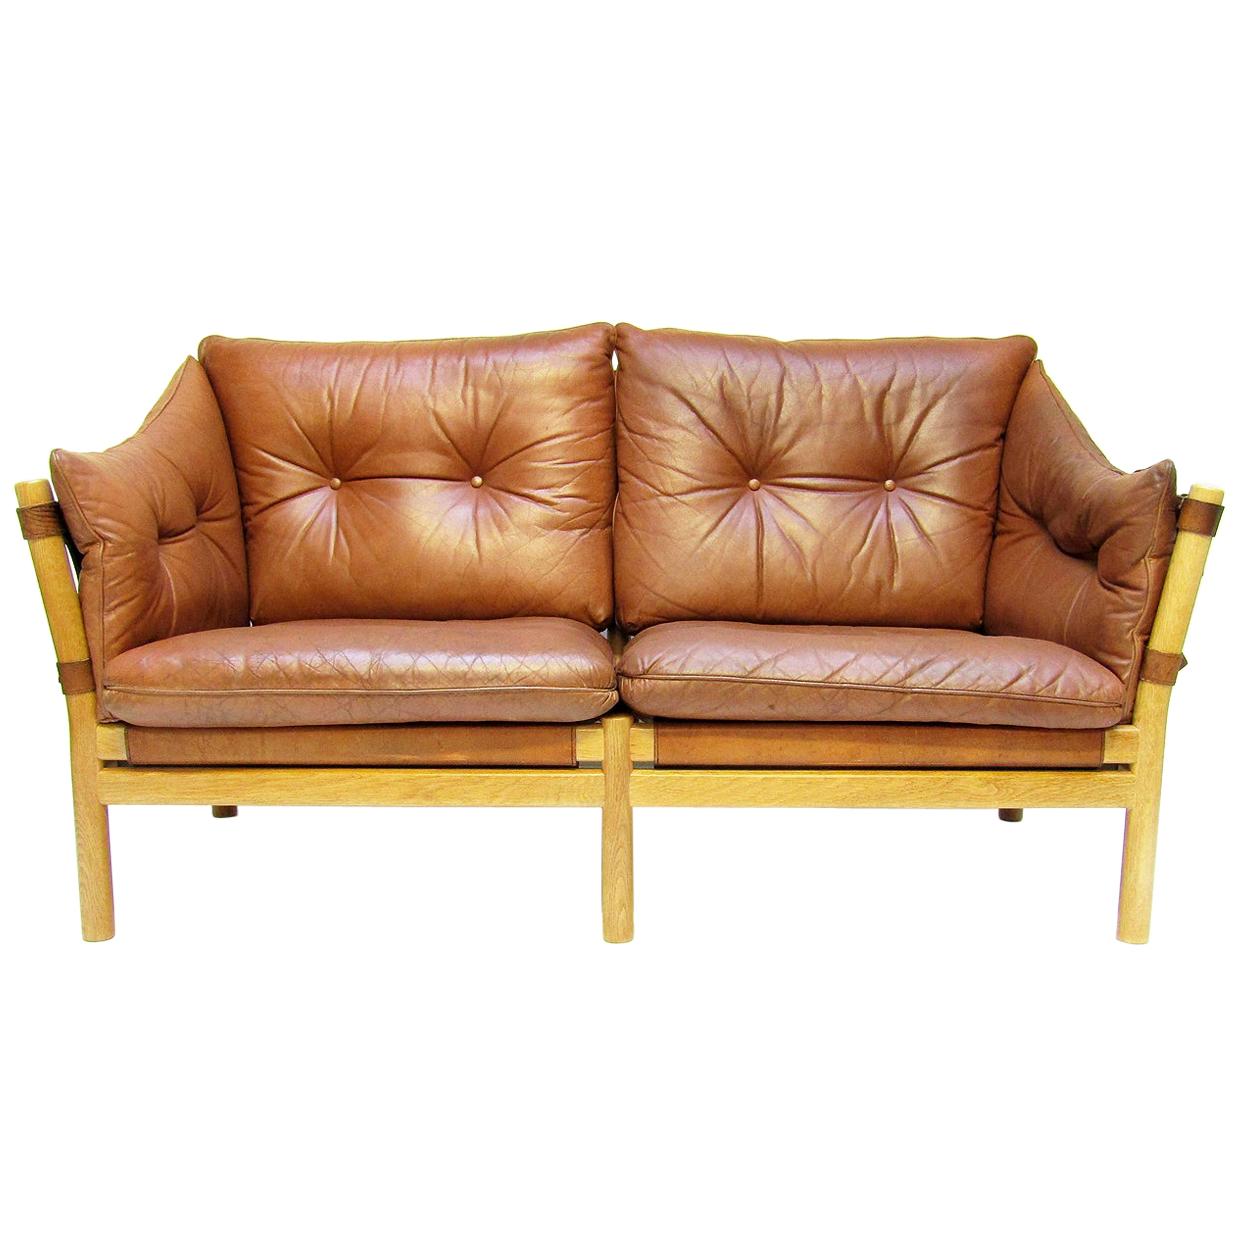 Swedish 1960s "Ilona" Sofa Loveseat In Tan Leather by Arne Norell